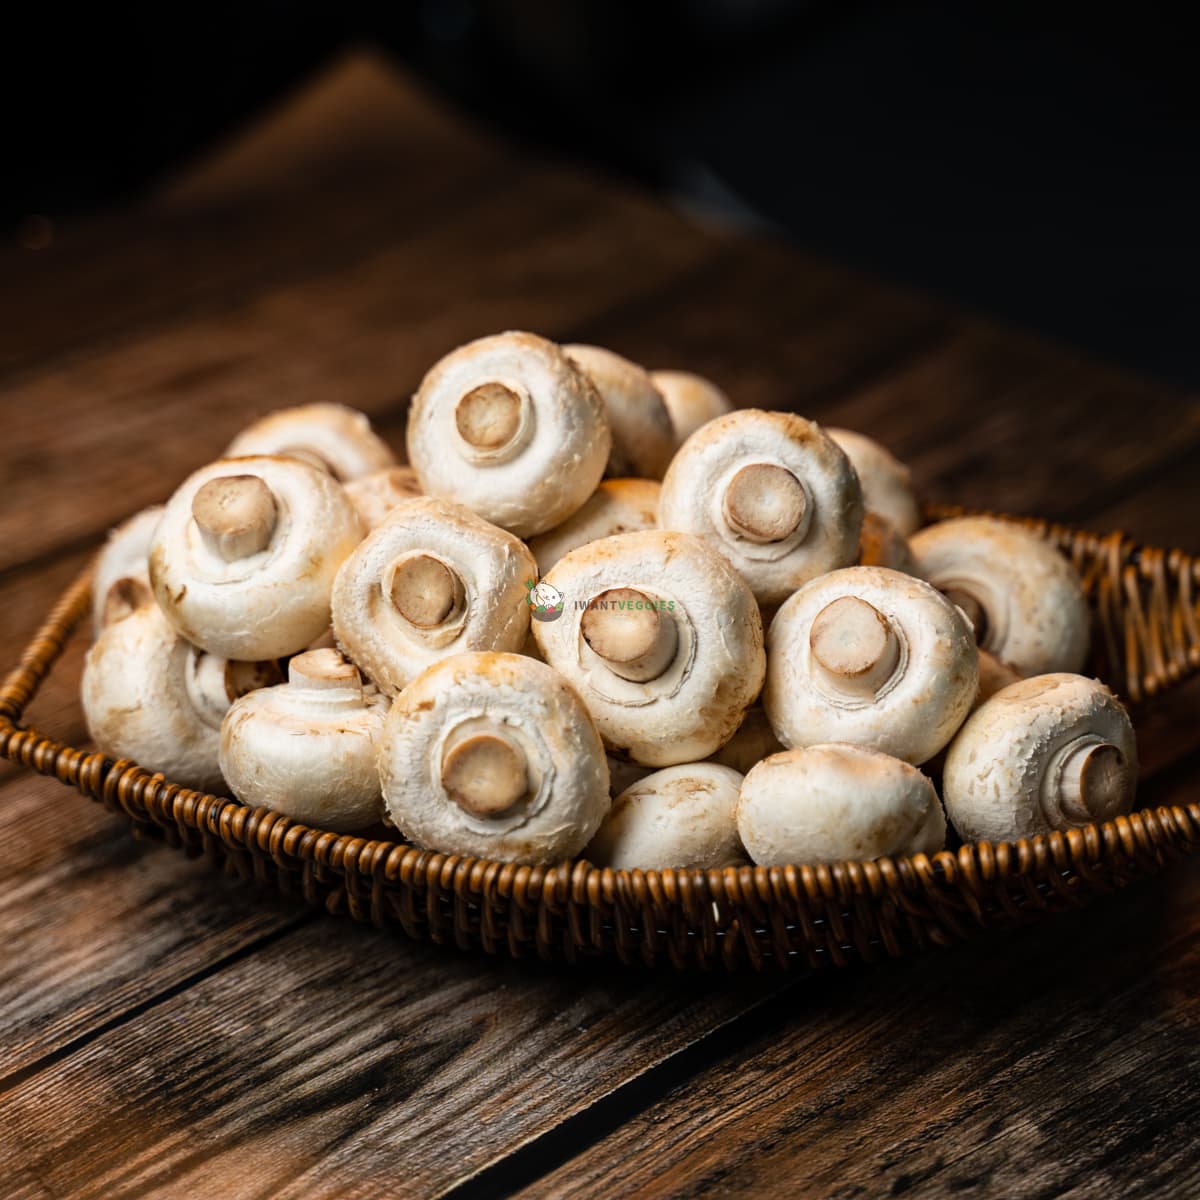 A basket of white button mushrooms sits on a wooden surface. The mushrooms are all different sizes and shapes, and they have a smooth, white skin. 